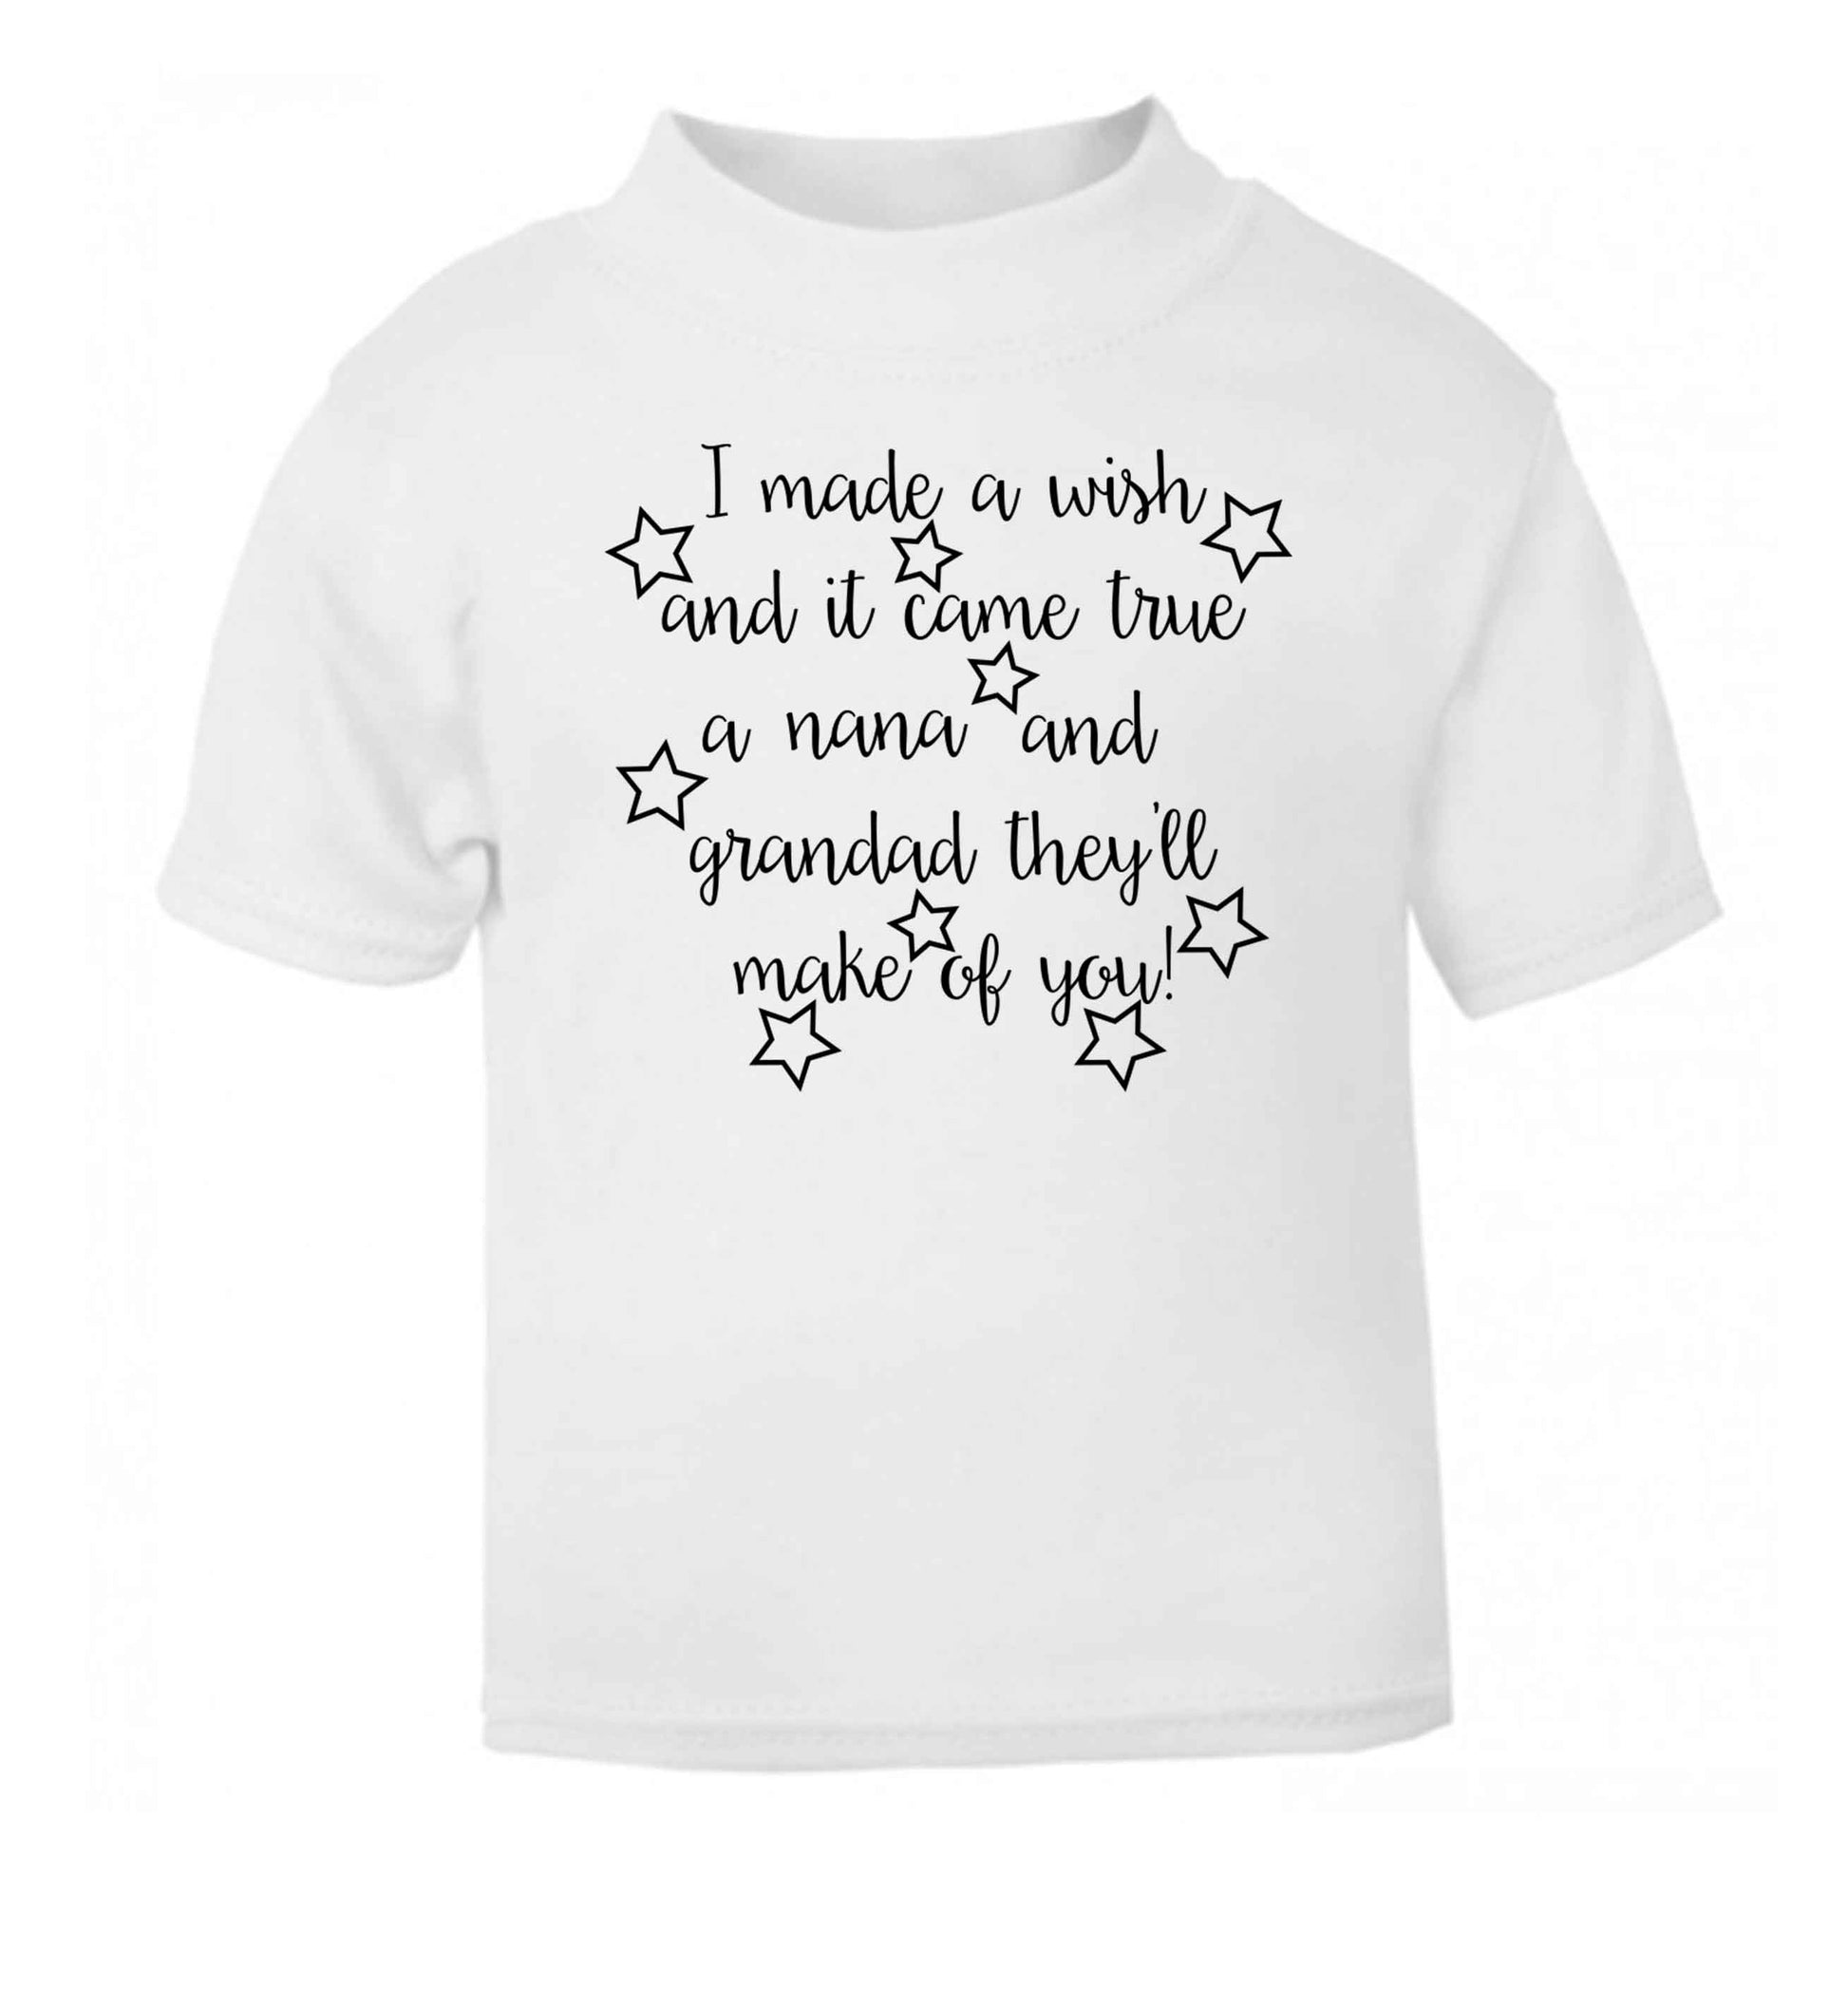 I made a wish and it came true a nana and grandad they'll make of you! white Baby Toddler Tshirt 2 Years